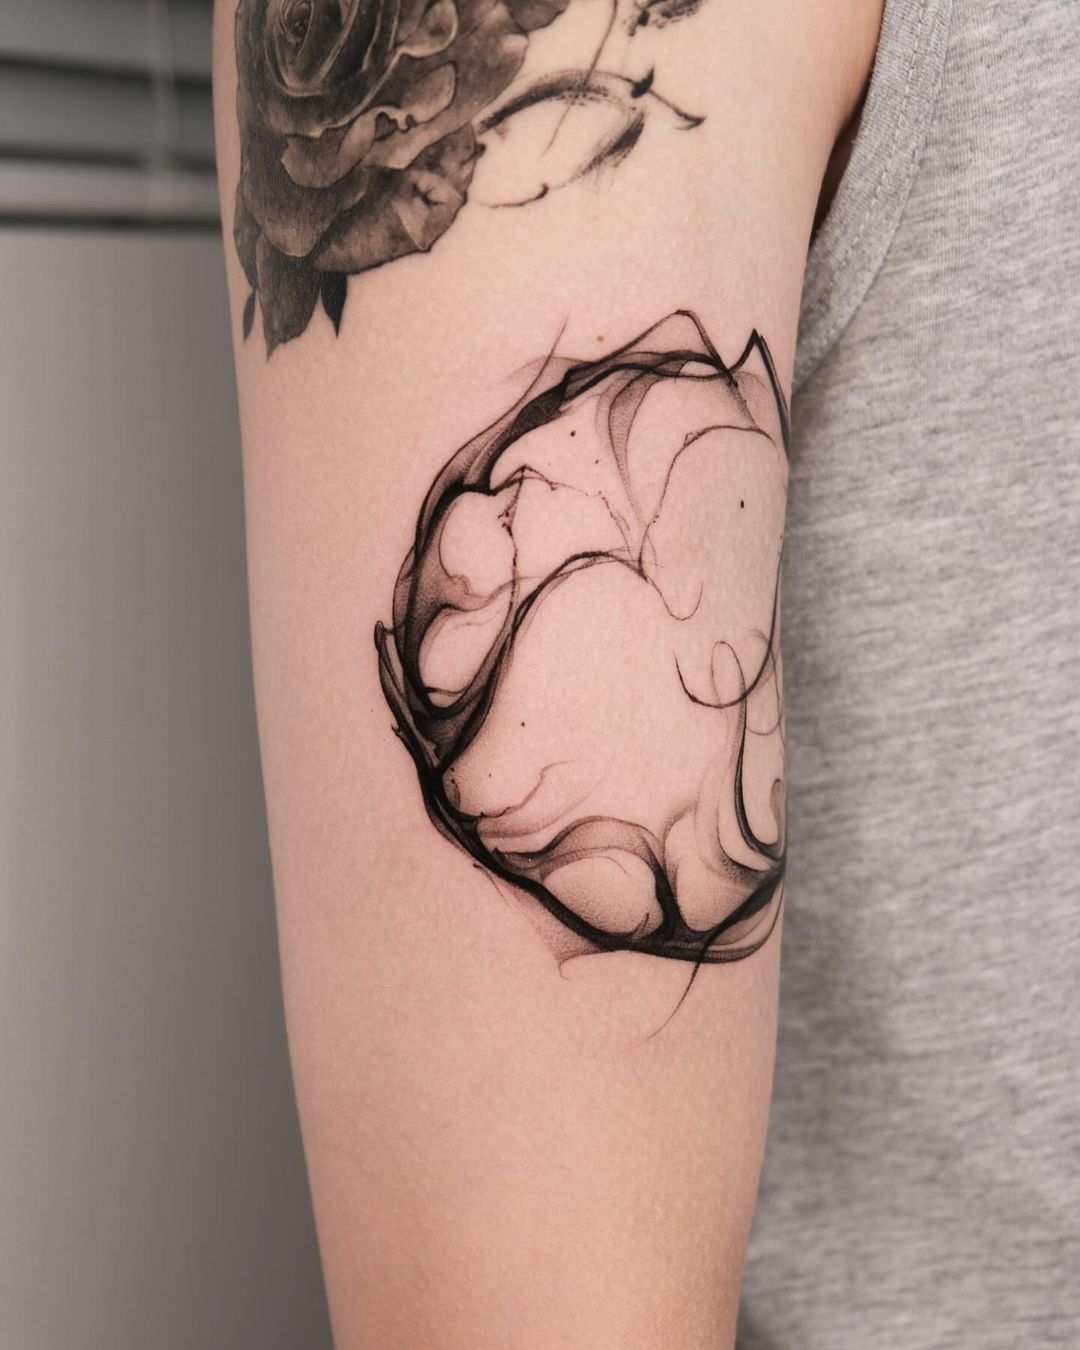 Black ink abstract tattoo by sofa.so .ft